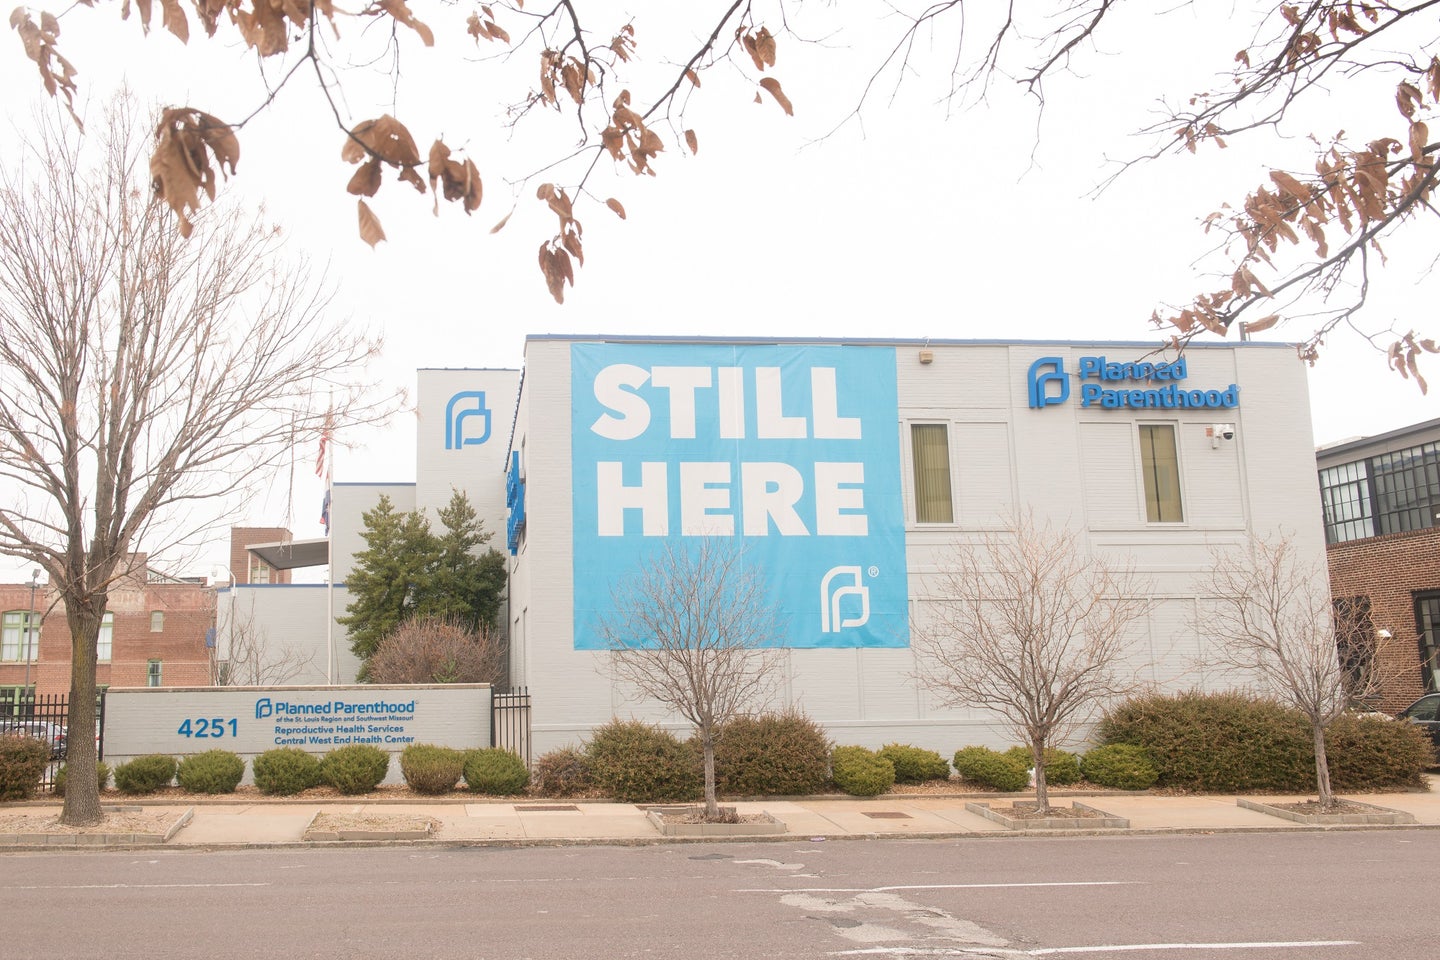 St. Louis Planned Parenthood, the last abortion clinic in Missouri and the defendants in Dobbs v. Jackson's Women's Health Organization, with a Still Here sign during the Roe v. Wade SCOTUS decision